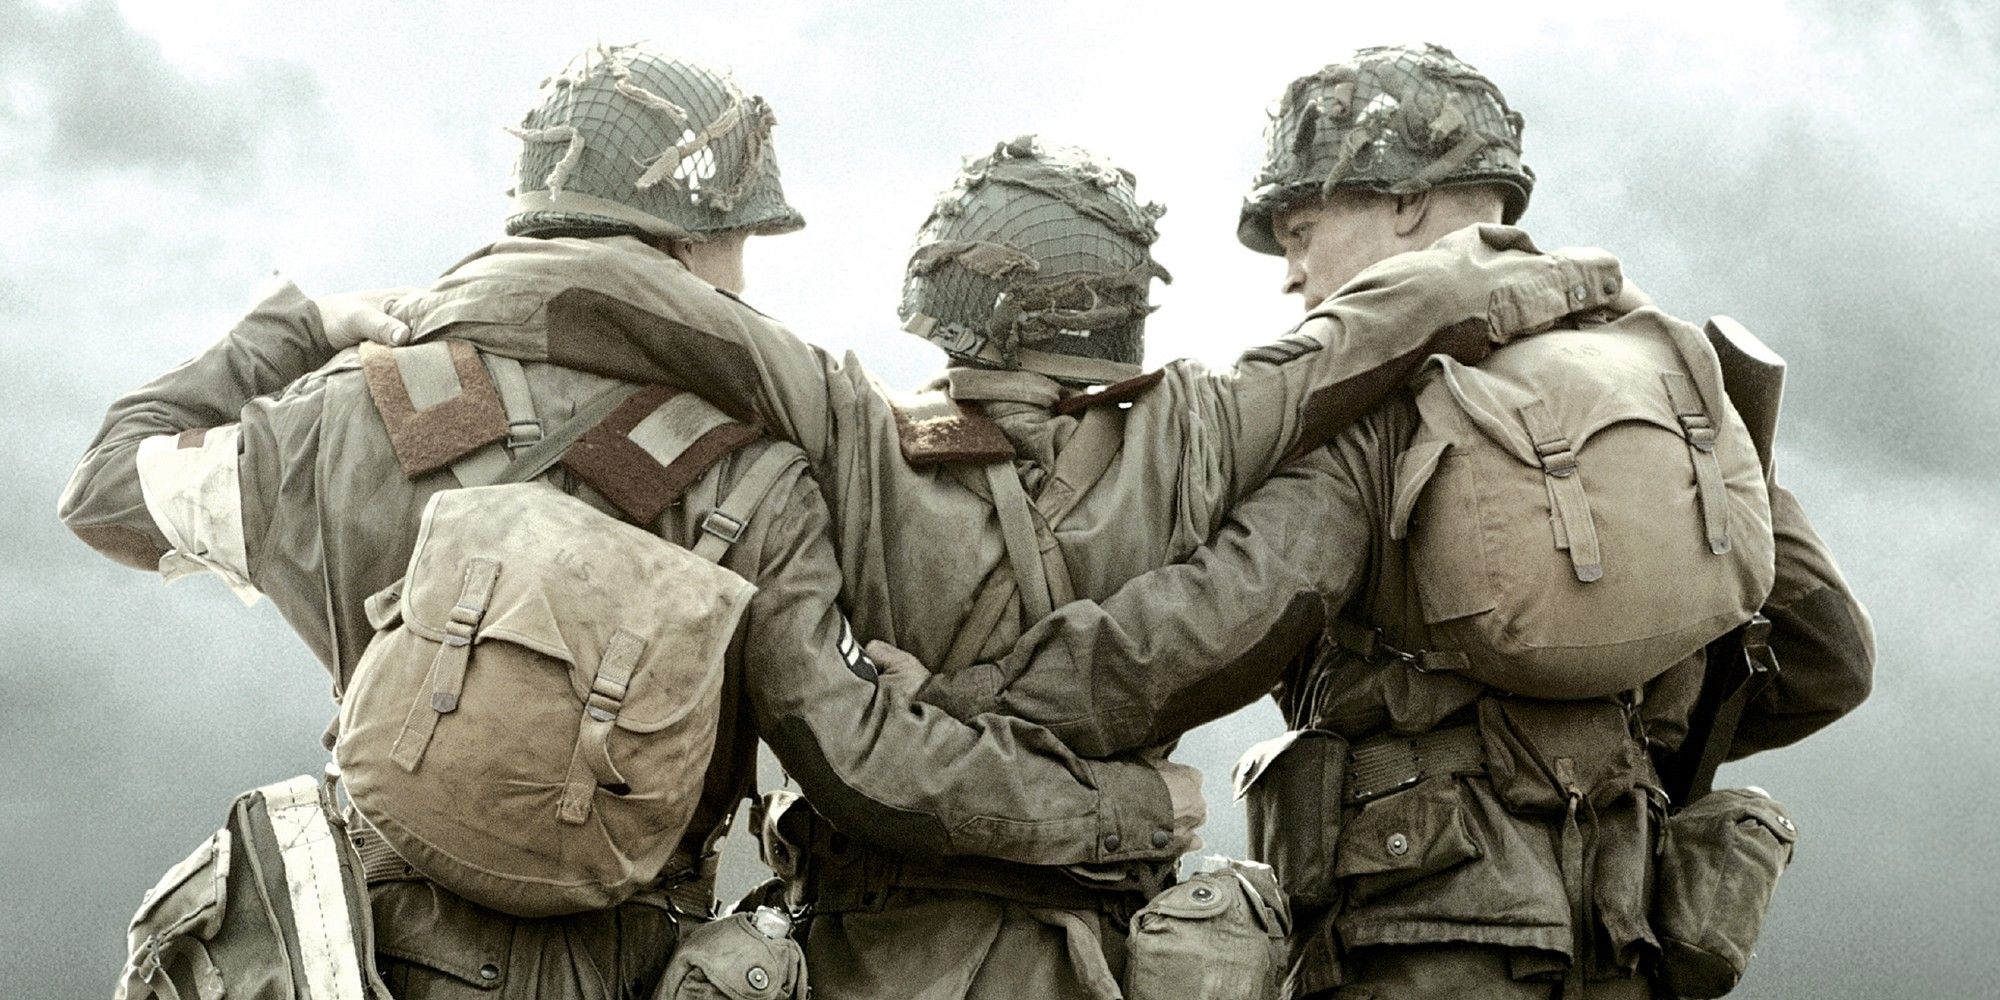 Three soldiers in 'Band of Brothers'